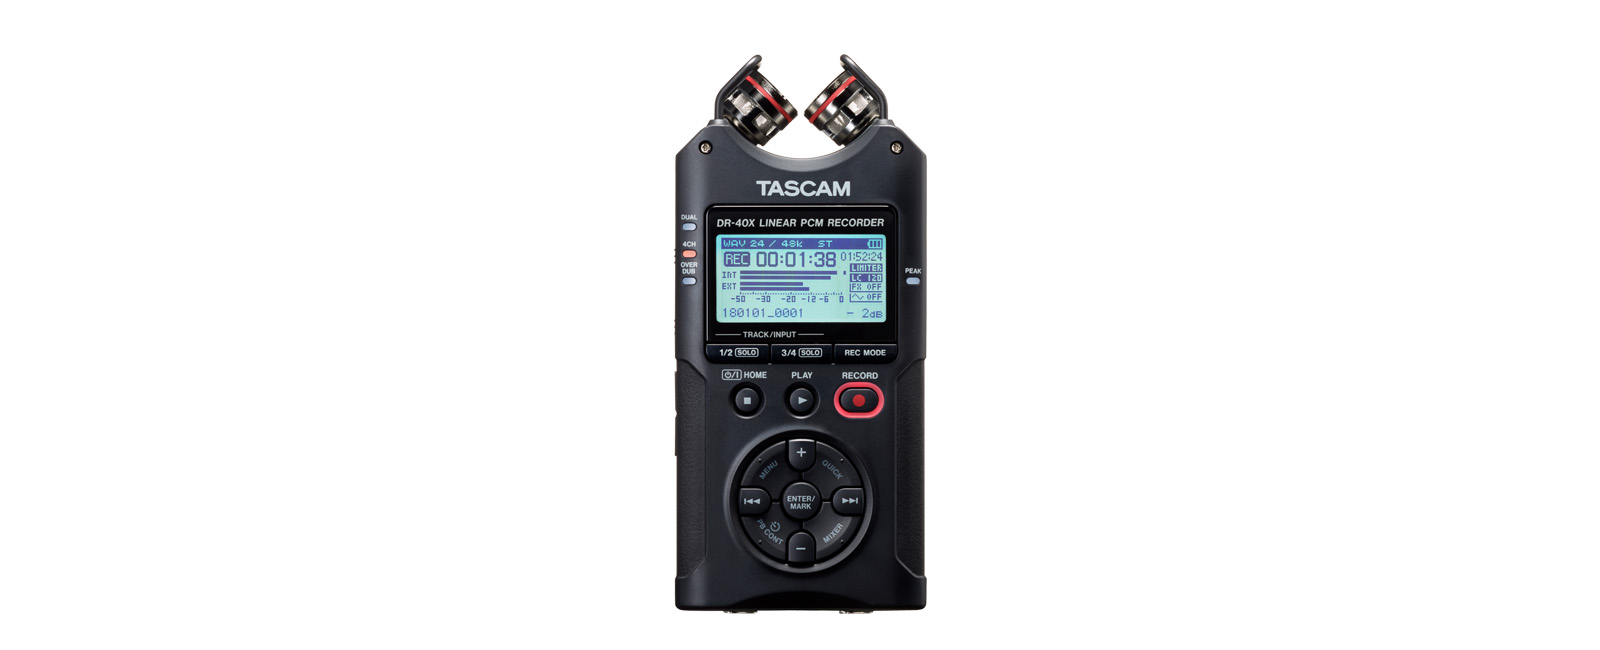 AK-DR11G MKII/AK-DR11C | OVERVIEW | TASCAM - United States